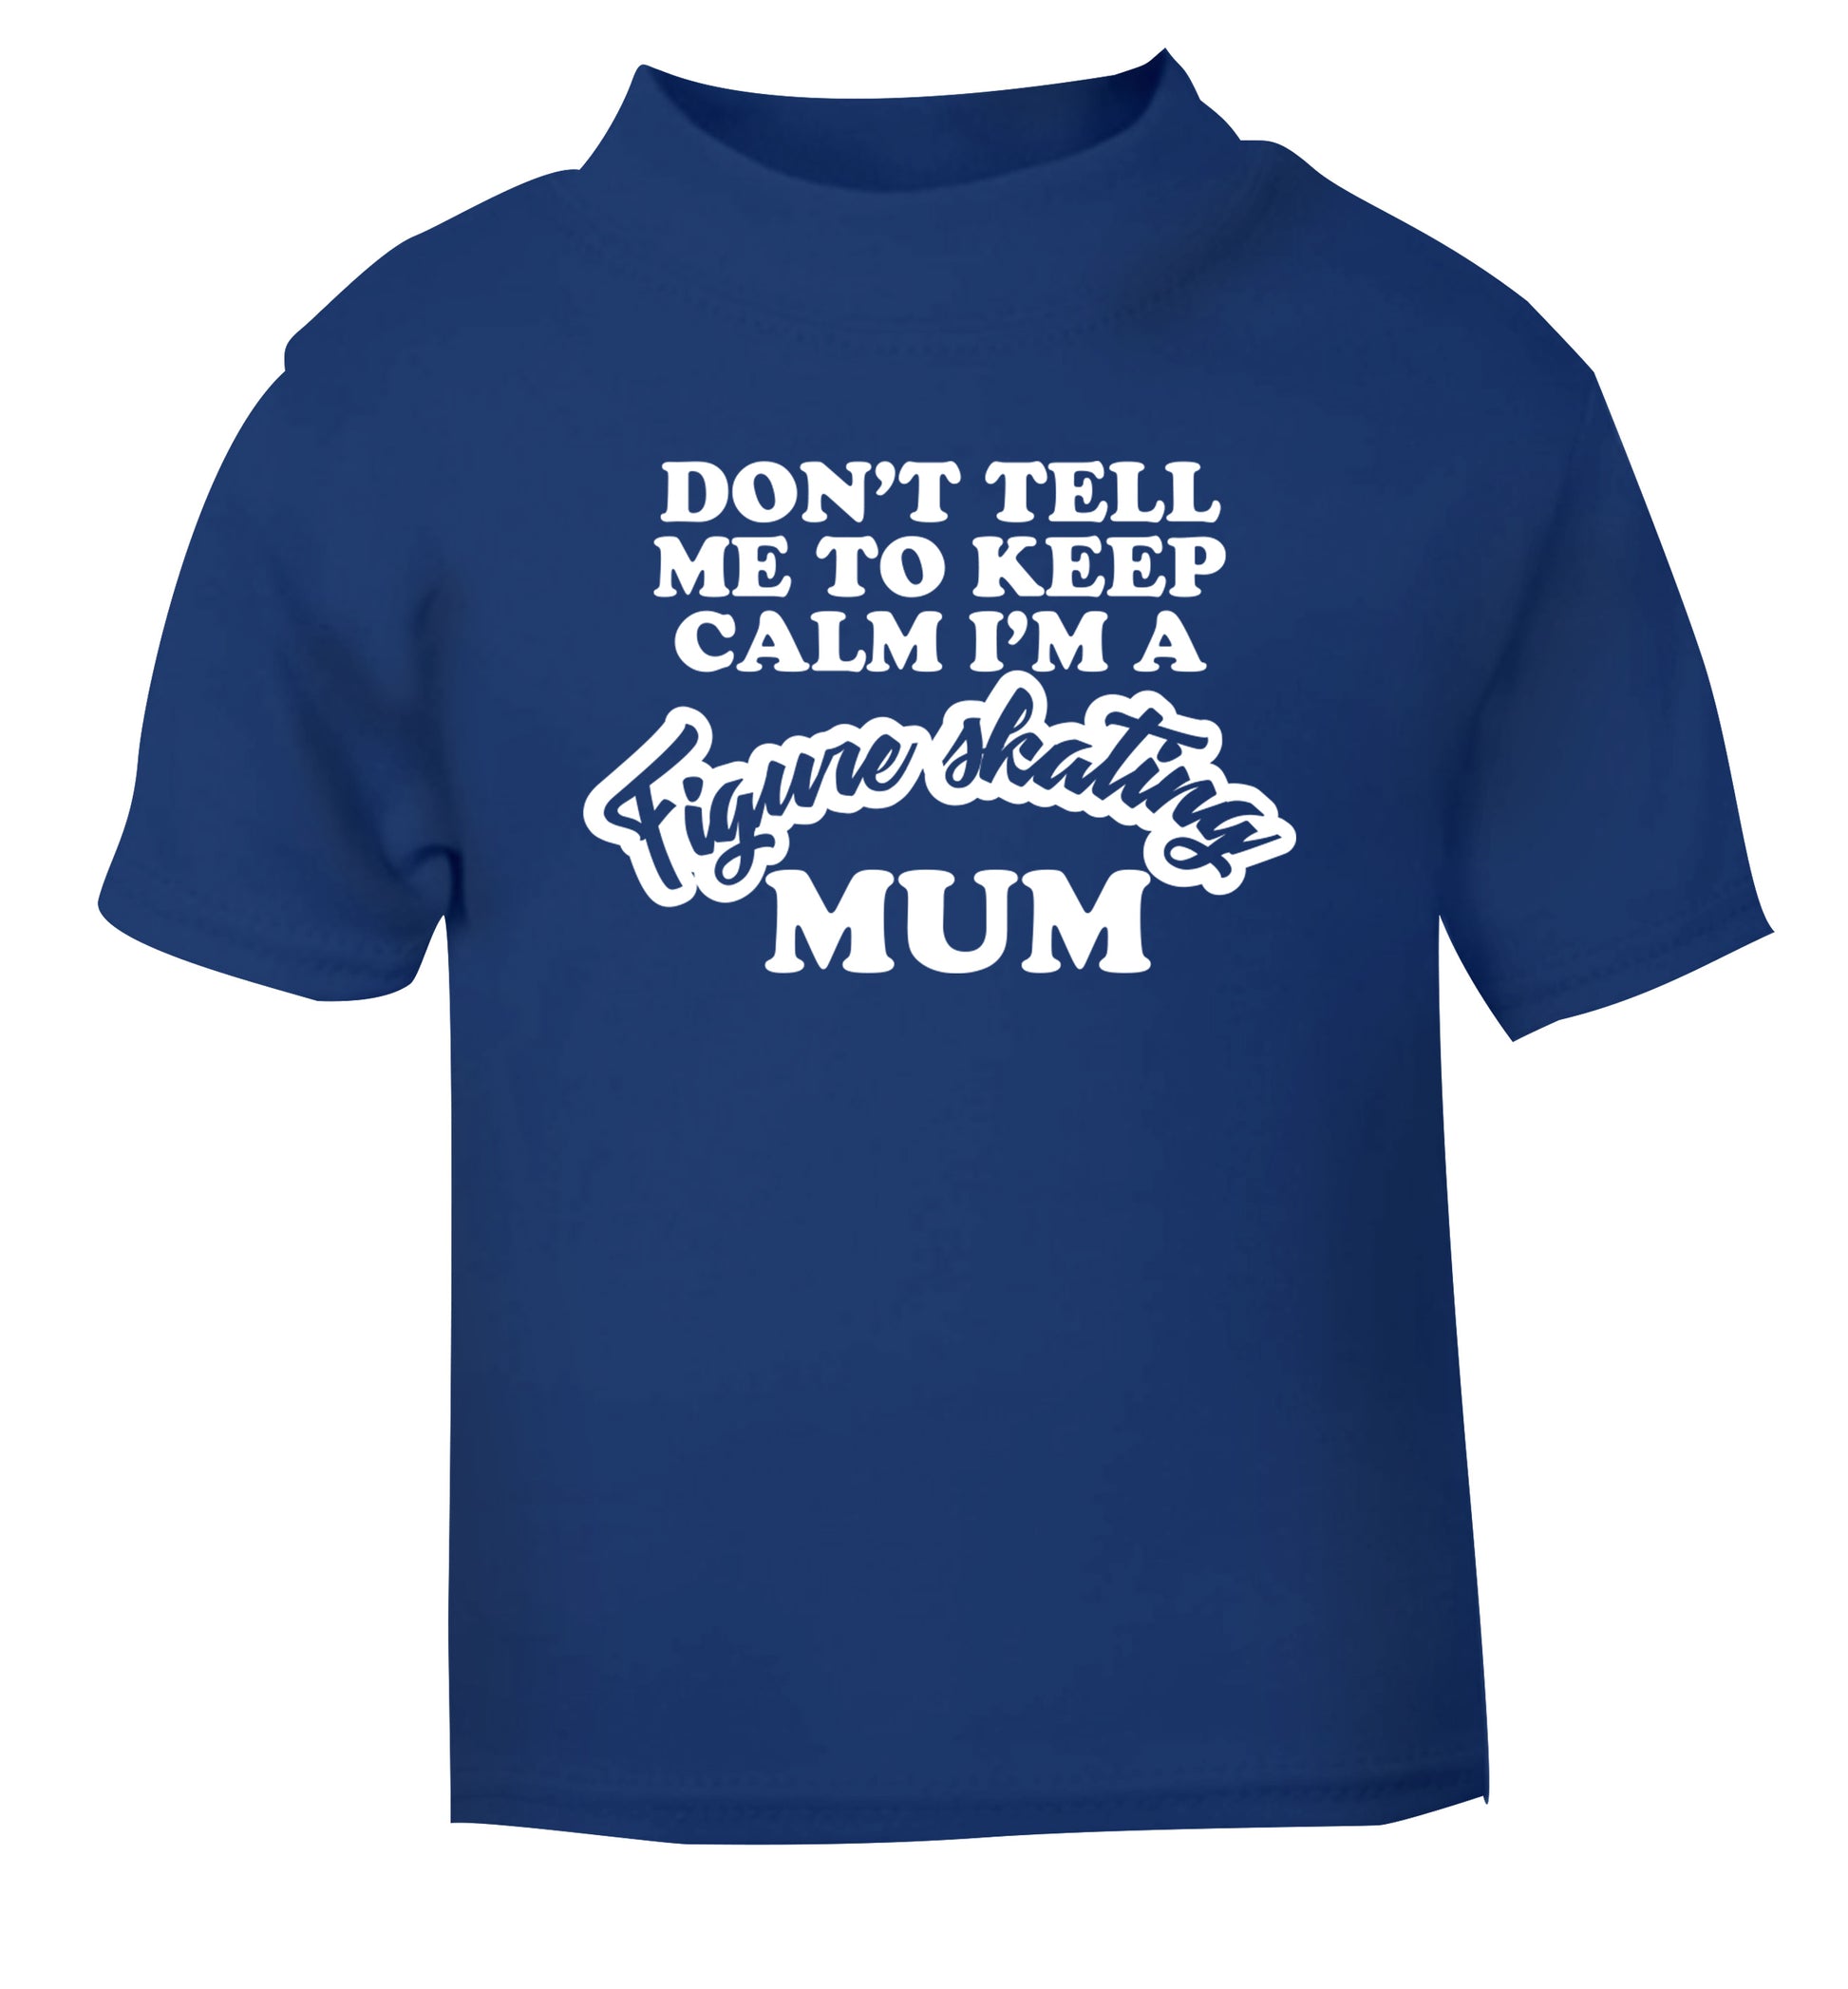 Don't tell me to keep calm I'm a figure skating mum blue Baby Toddler Tshirt 2 Years